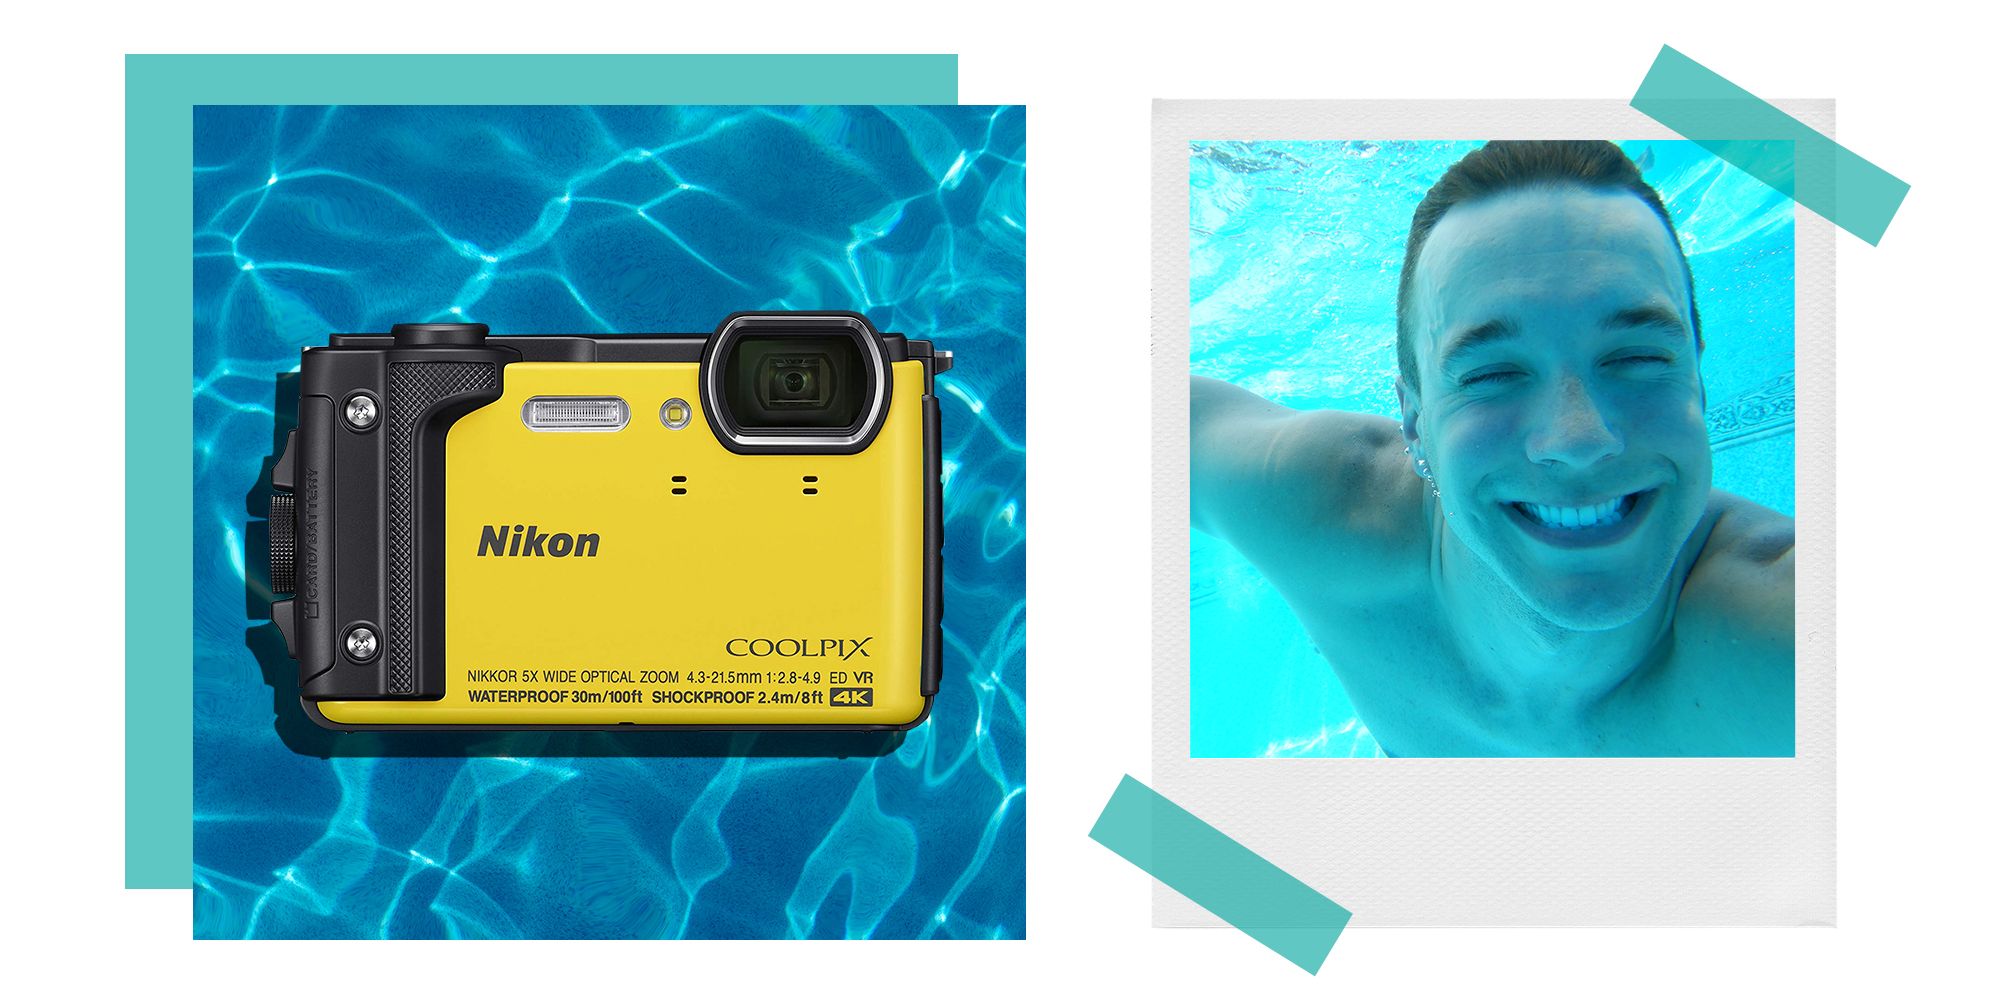 Nikon COOLPIX W300 Review 2019 - The Best Underwater Camera